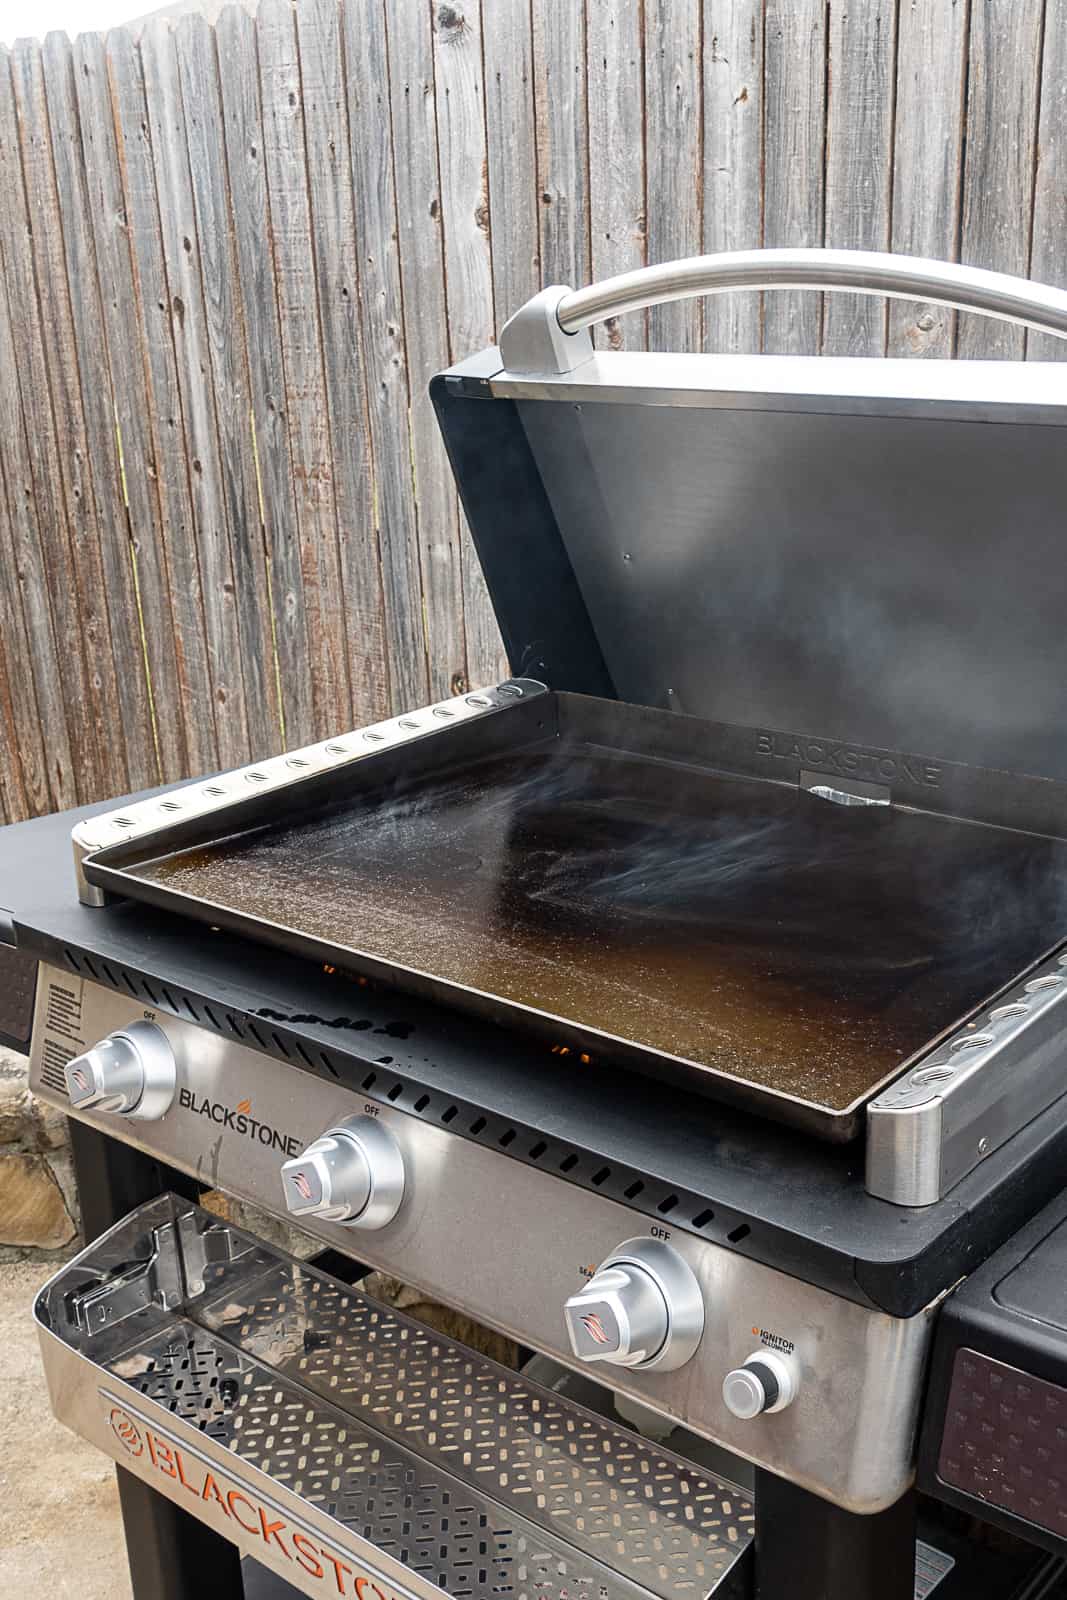 During Process of Seasoning Blackstone Griddle when oil burns off grill